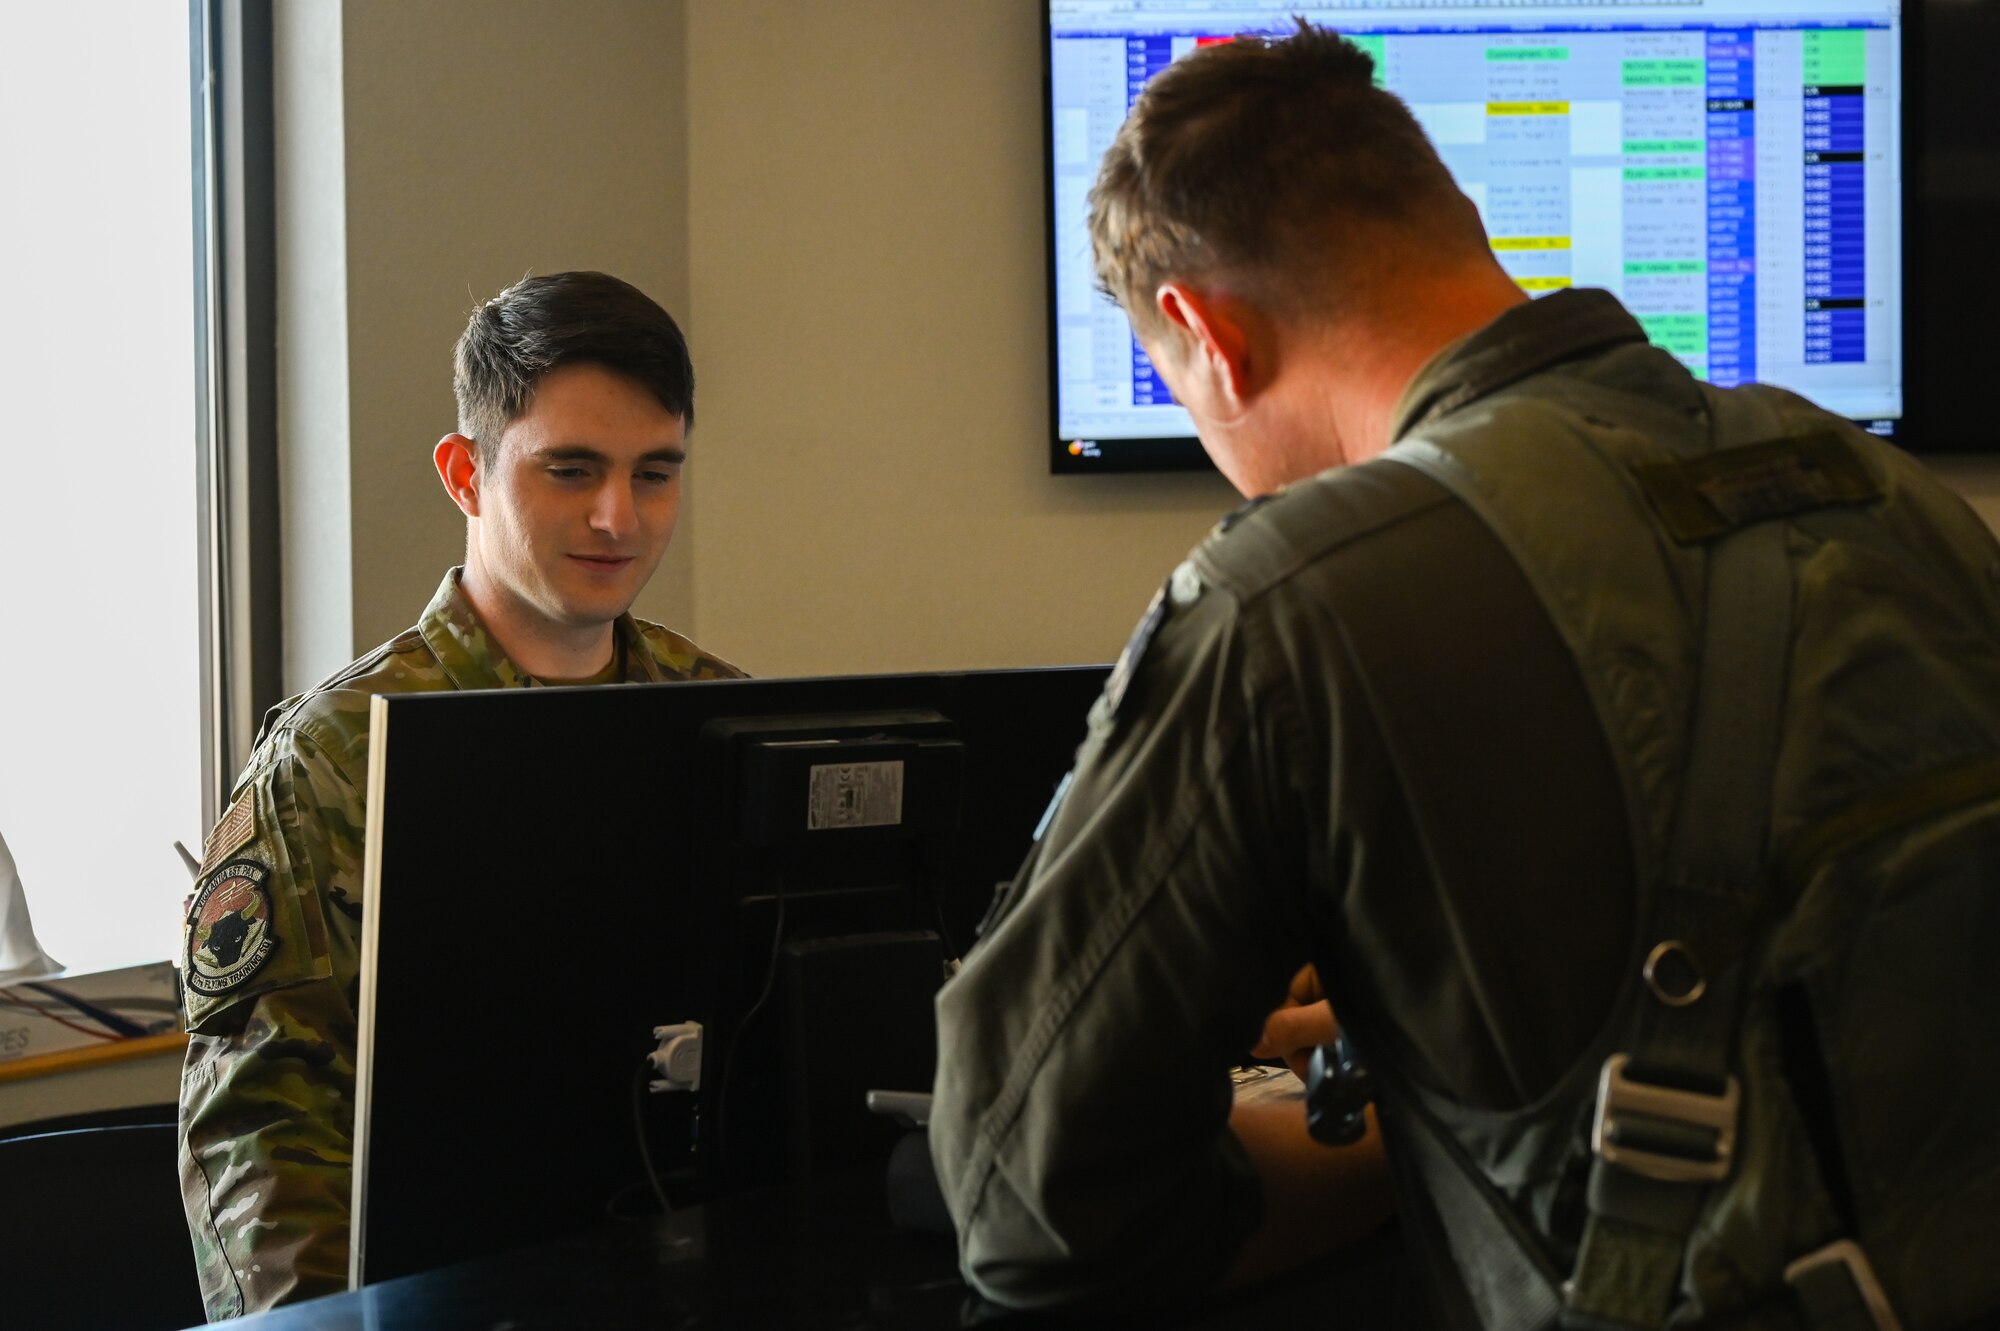 SARM teams ensure readiness for daily flying missions by managing aviation duties and aircrew safety requirements. (U.S. Air Force photo by Airman 1st Class Keira Rossman)